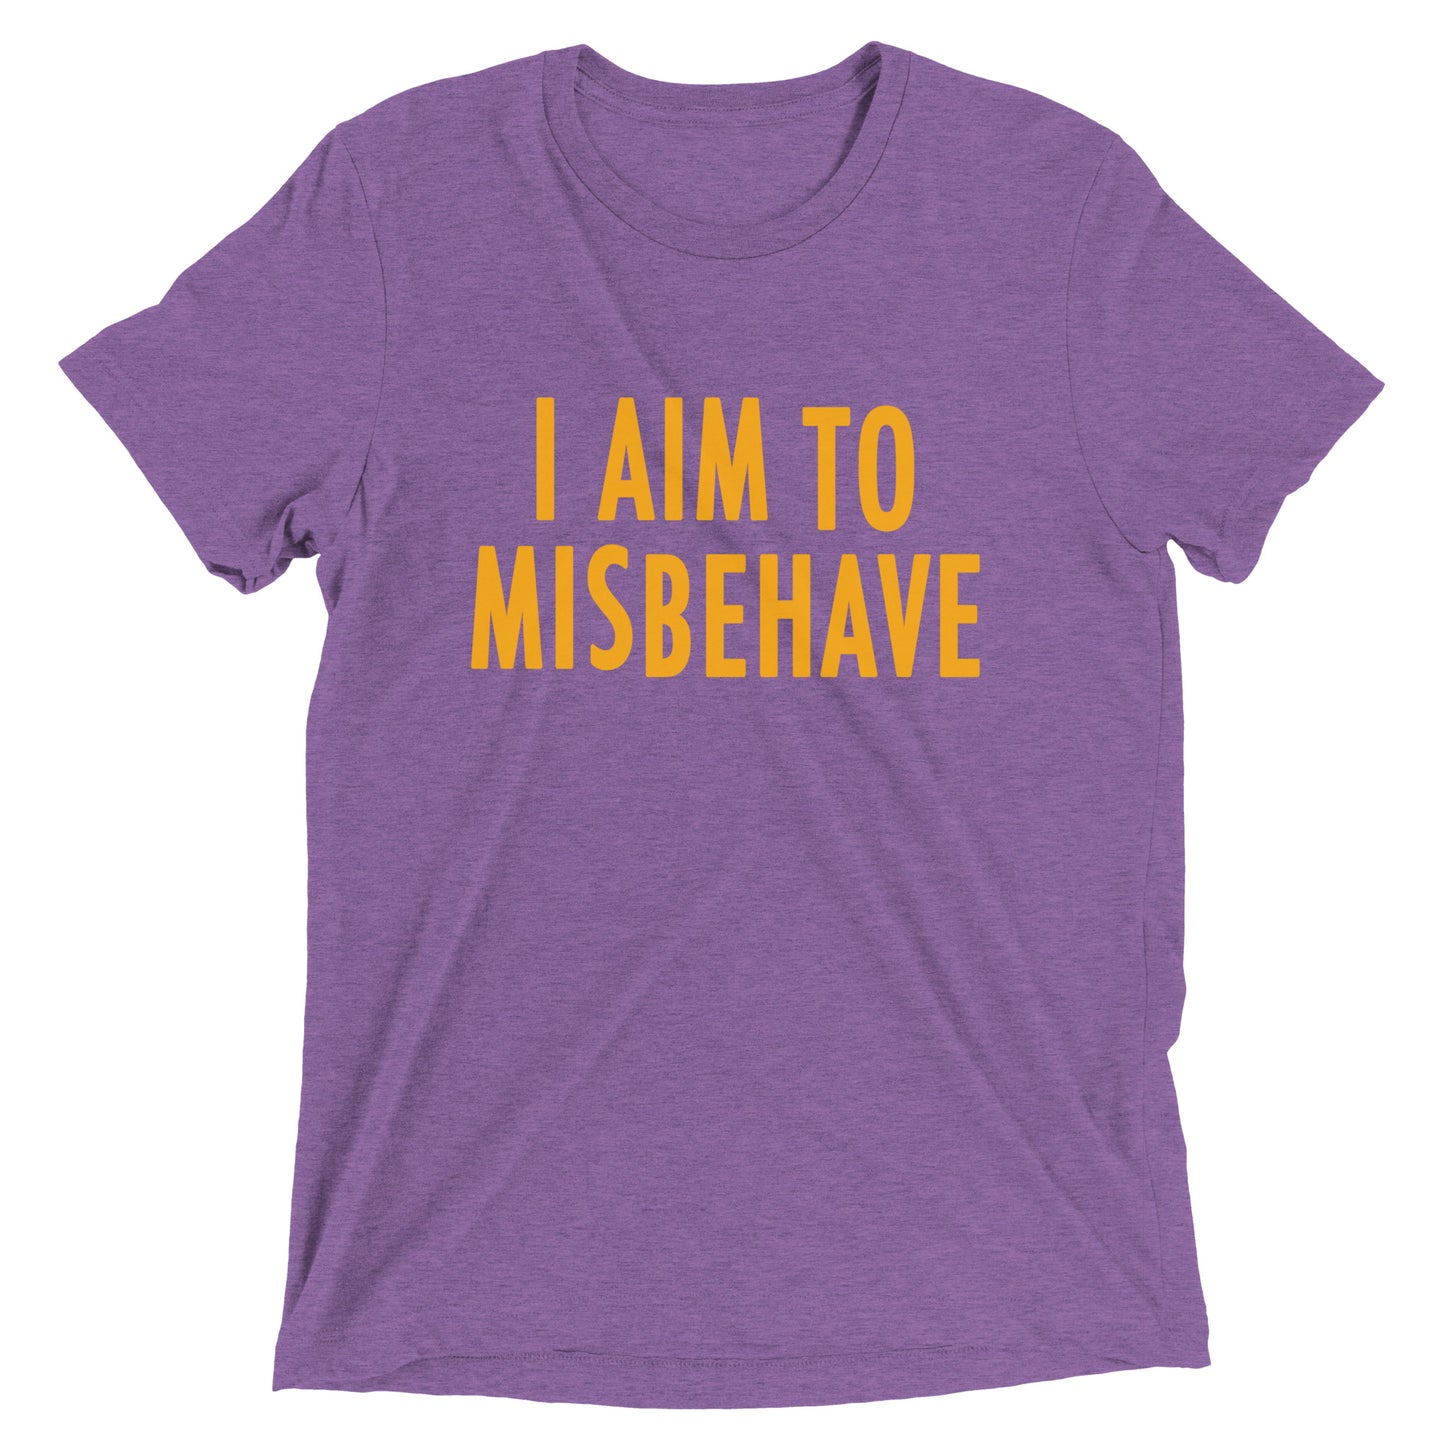 I Aim To Misbehave Men's Tri-Blend Tee